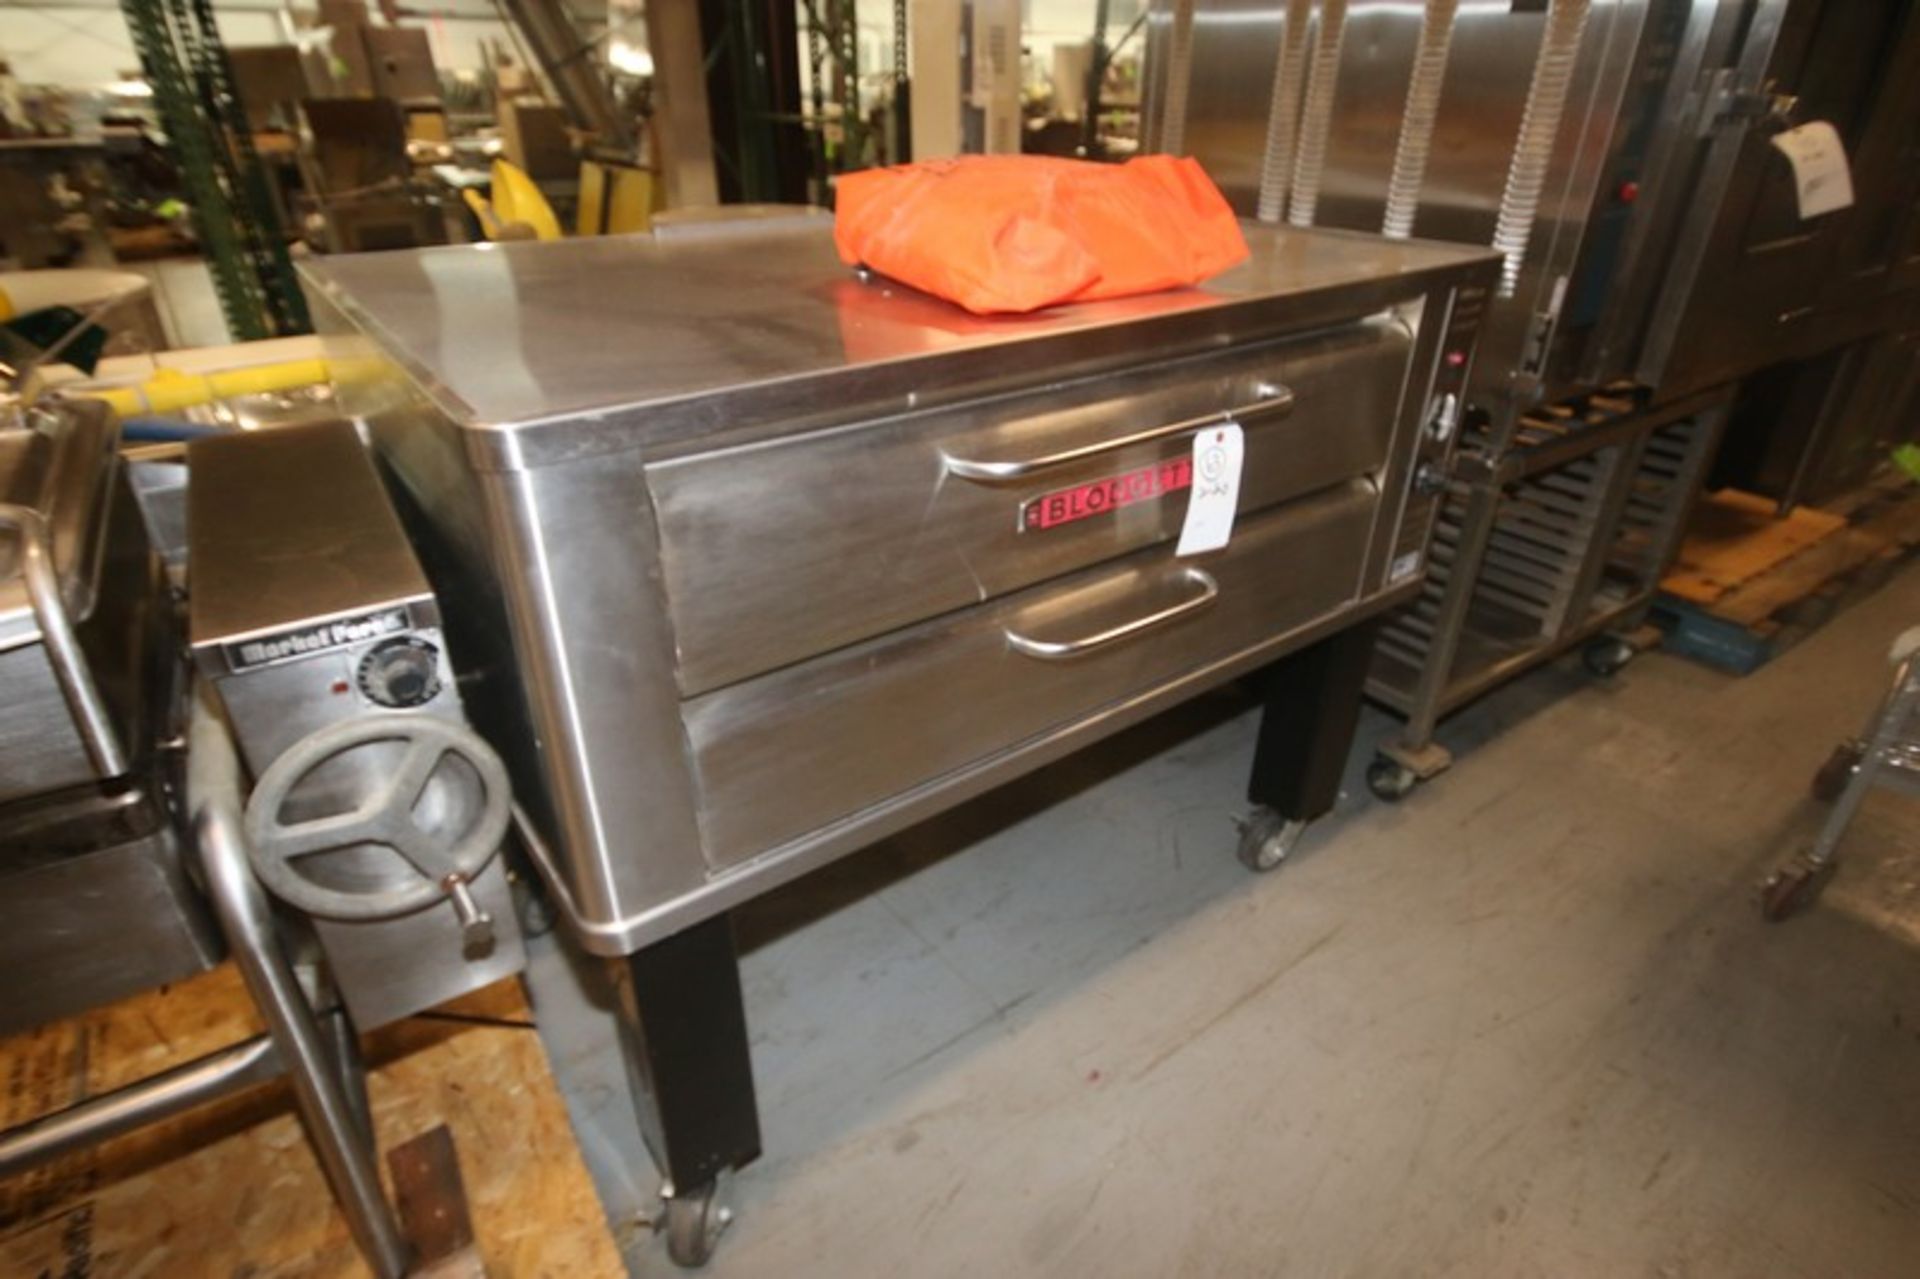 Blodgett Pizza Oven,M/N 961-P, S/N 091409AJ0055, with (2) Levels with S/S Covers, with Fire Blanket, - Image 2 of 8